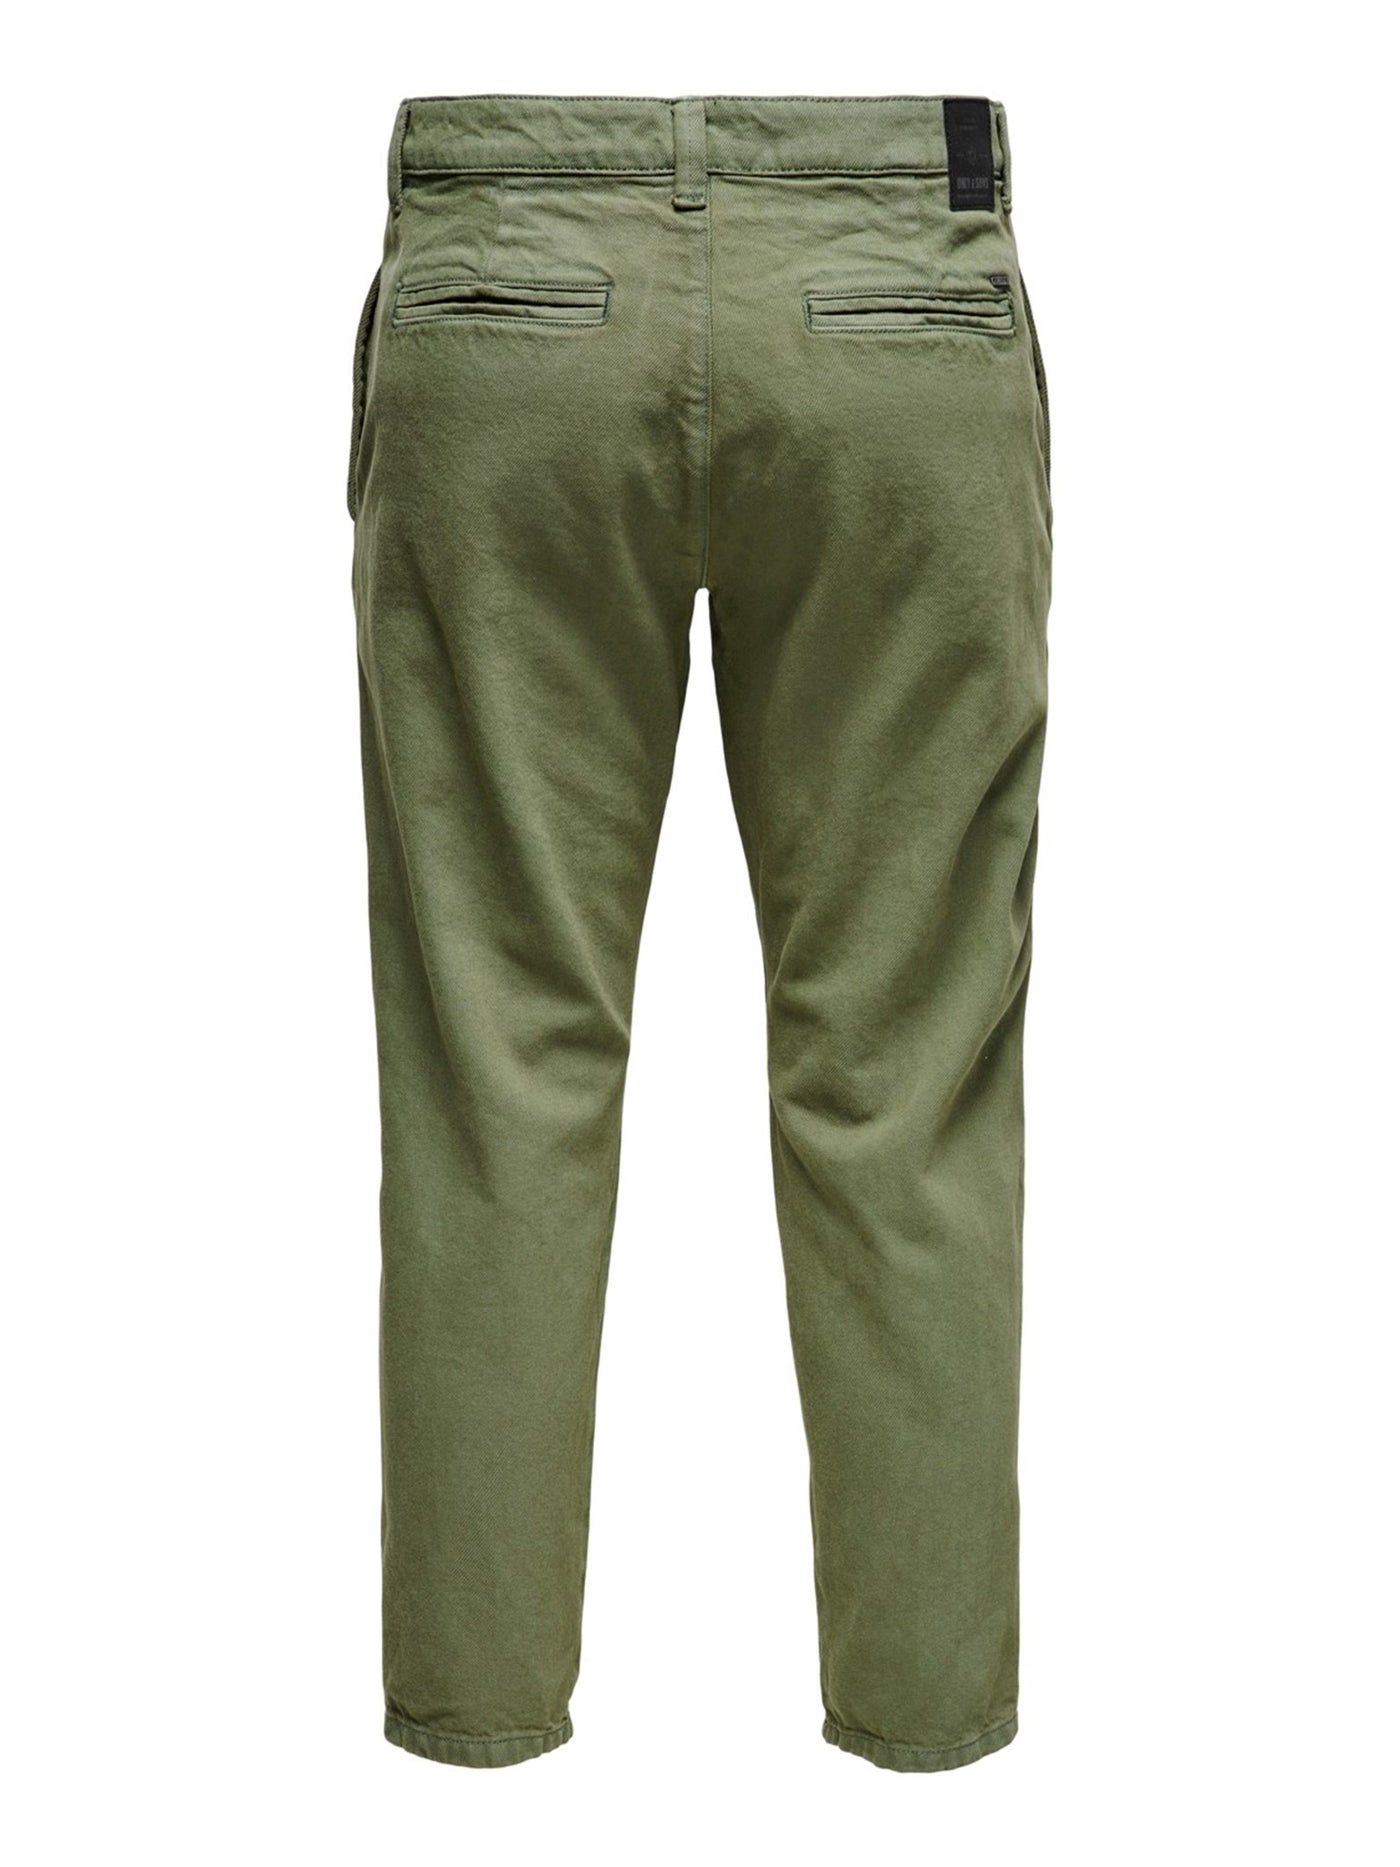 Avi Beam Chino Twill Pants - Olive Night - Only & Sons 7